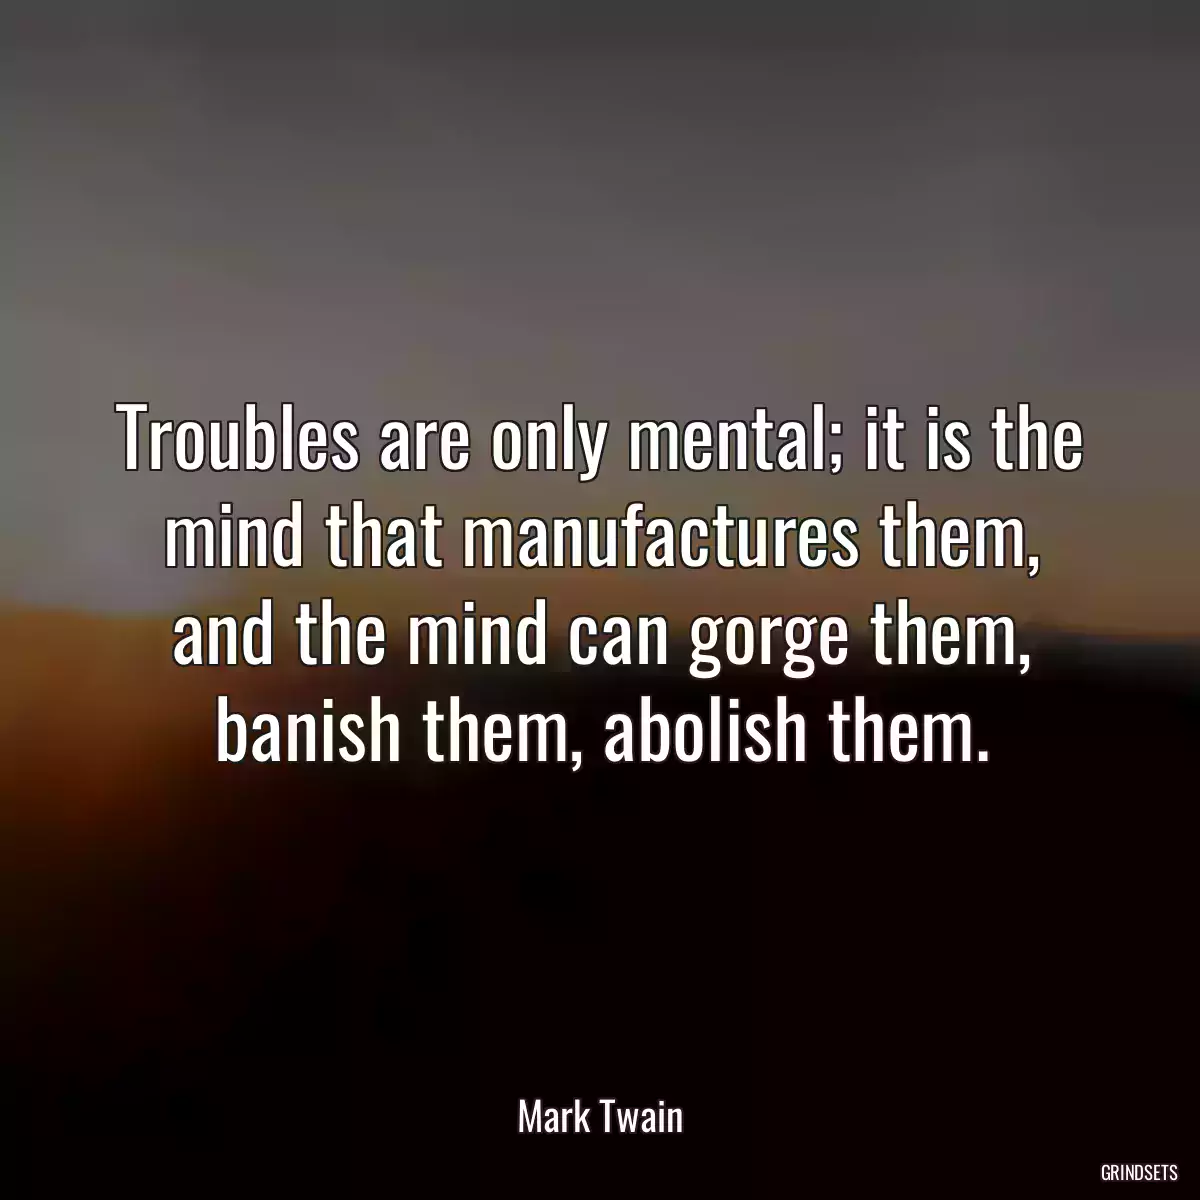 Troubles are only mental; it is the mind that manufactures them, and the mind can gorge them, banish them, abolish them.